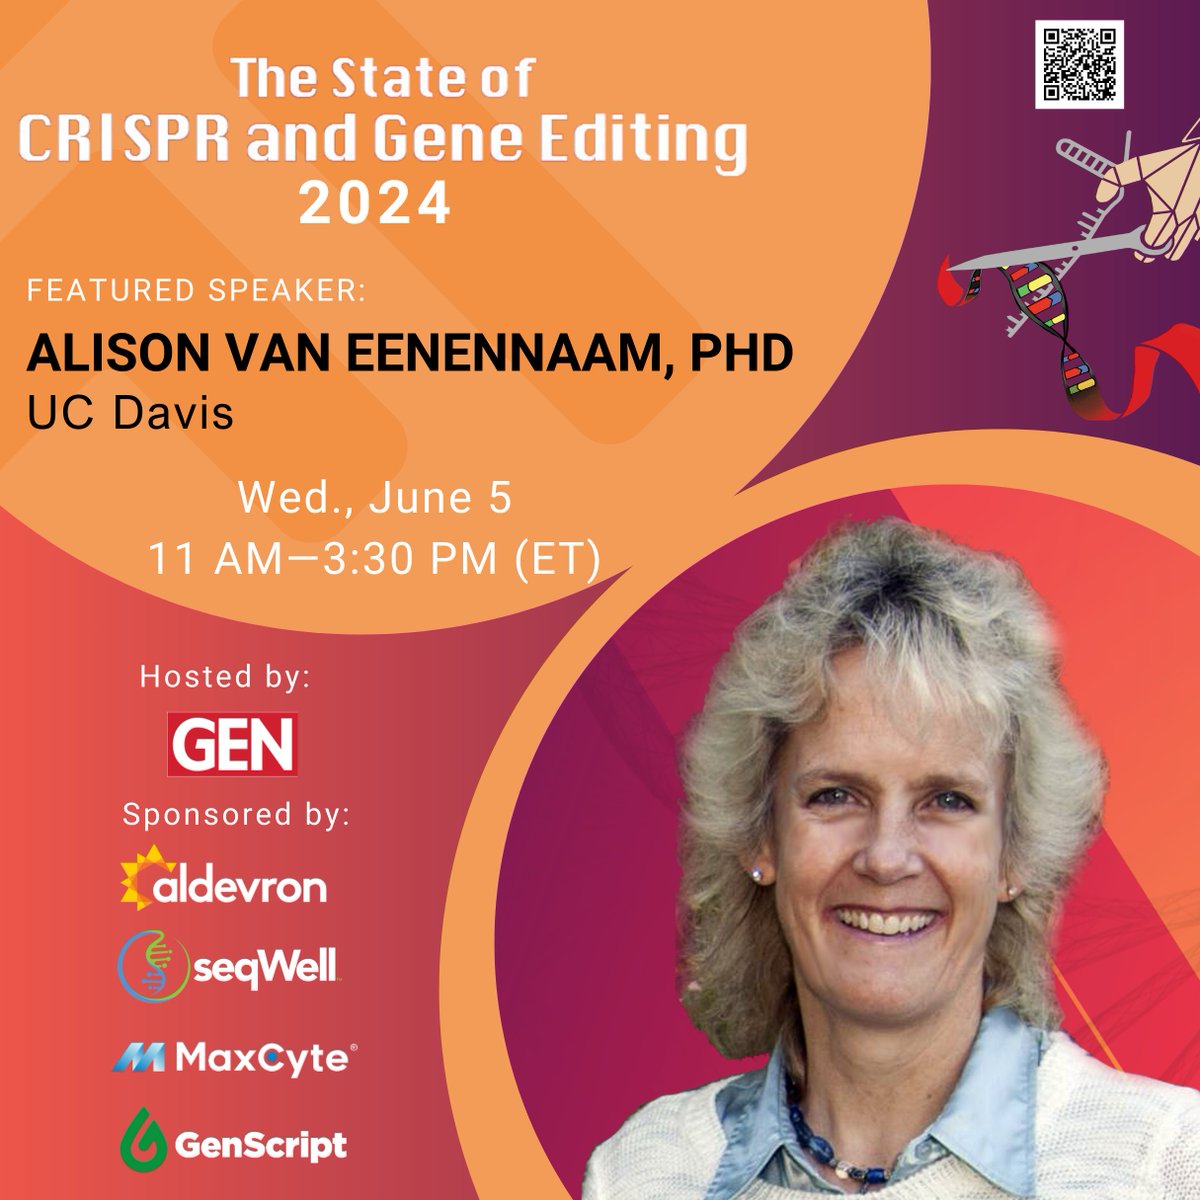 Only 5 days left to register for THE STATE OF CRISPR AND GENE EDITING summit! 🗓️June 5th Hosted by @GENbio Sponsored by @Aldevron, @seqwell, @MaxCyte_info, & @GenScript Featured Speaker: @BioBeef (@ucdavis) Register: ow.ly/jIUI50S0n3T #CRISPR #GeneEditing #Biotech